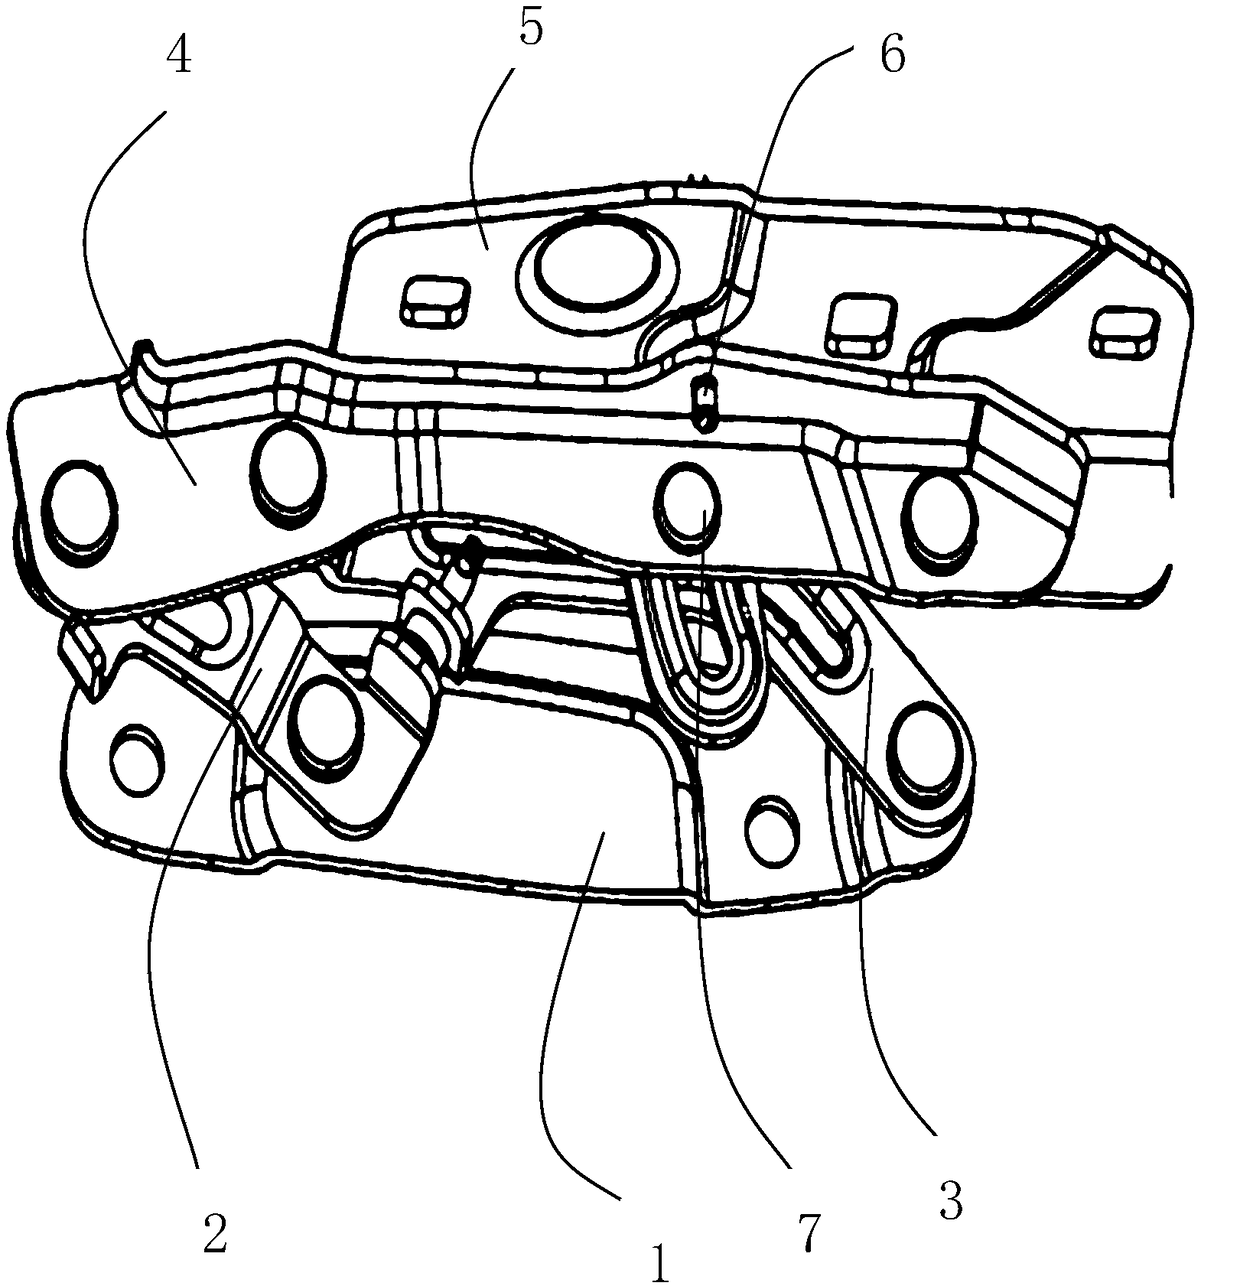 Five-connecting rod hinge structure of active pedestrian protection engine cover